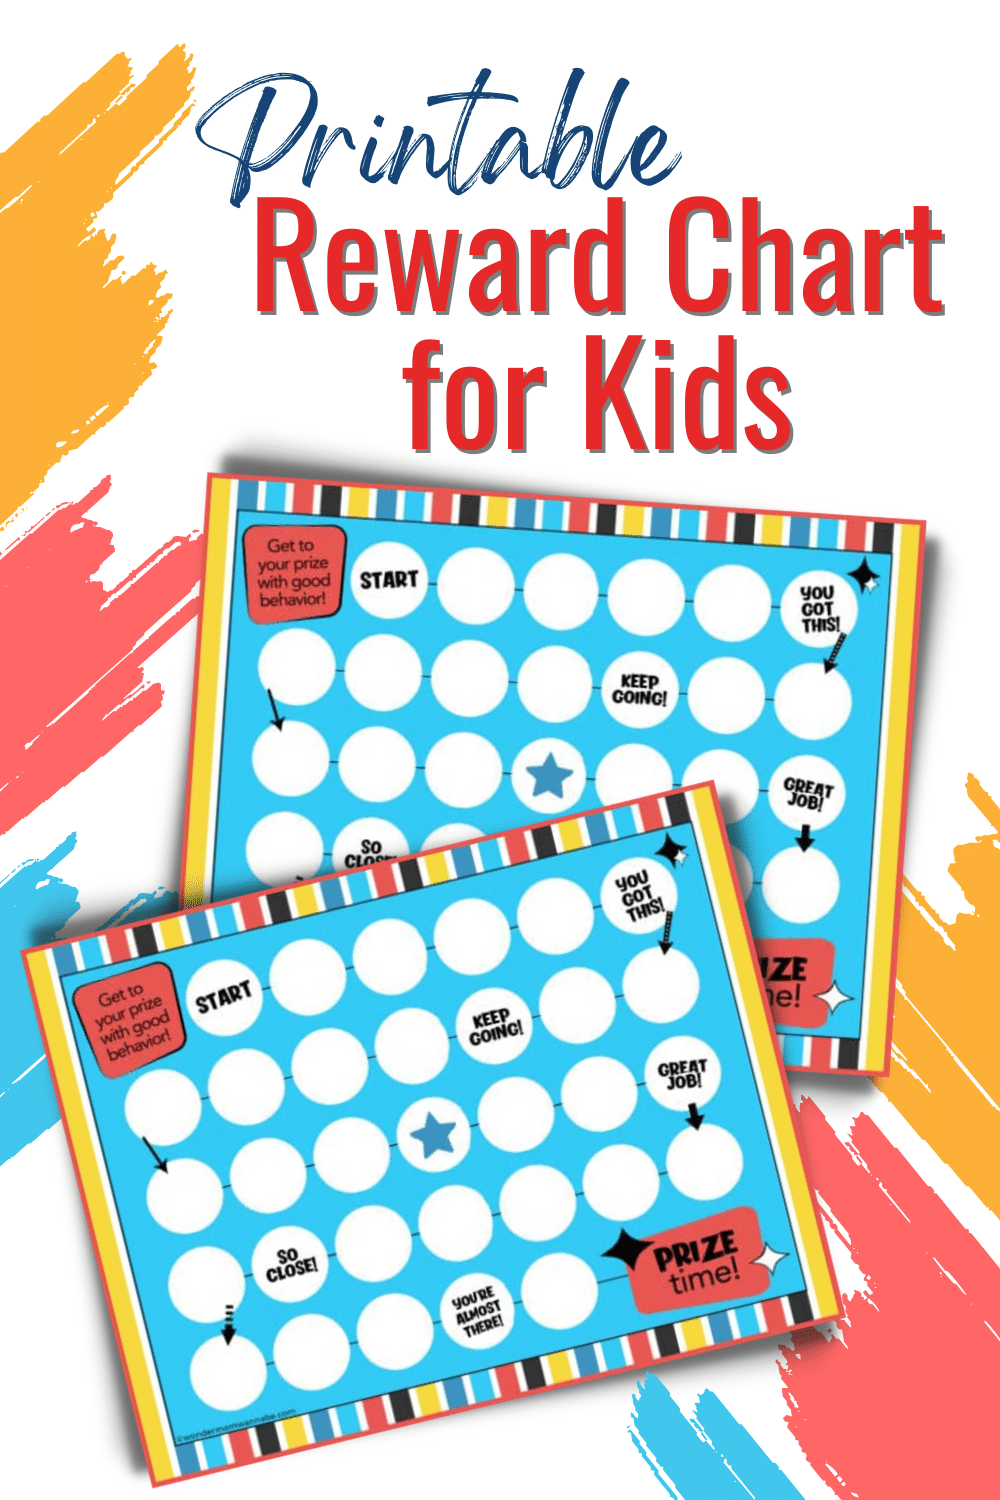 This printable reward chart for kids can be used in many ways and is a great tool to help kids improve behavior and reach goals. #printables #rewardcharts #printablesforkids #rewardchartprintable via @wondermomwannab